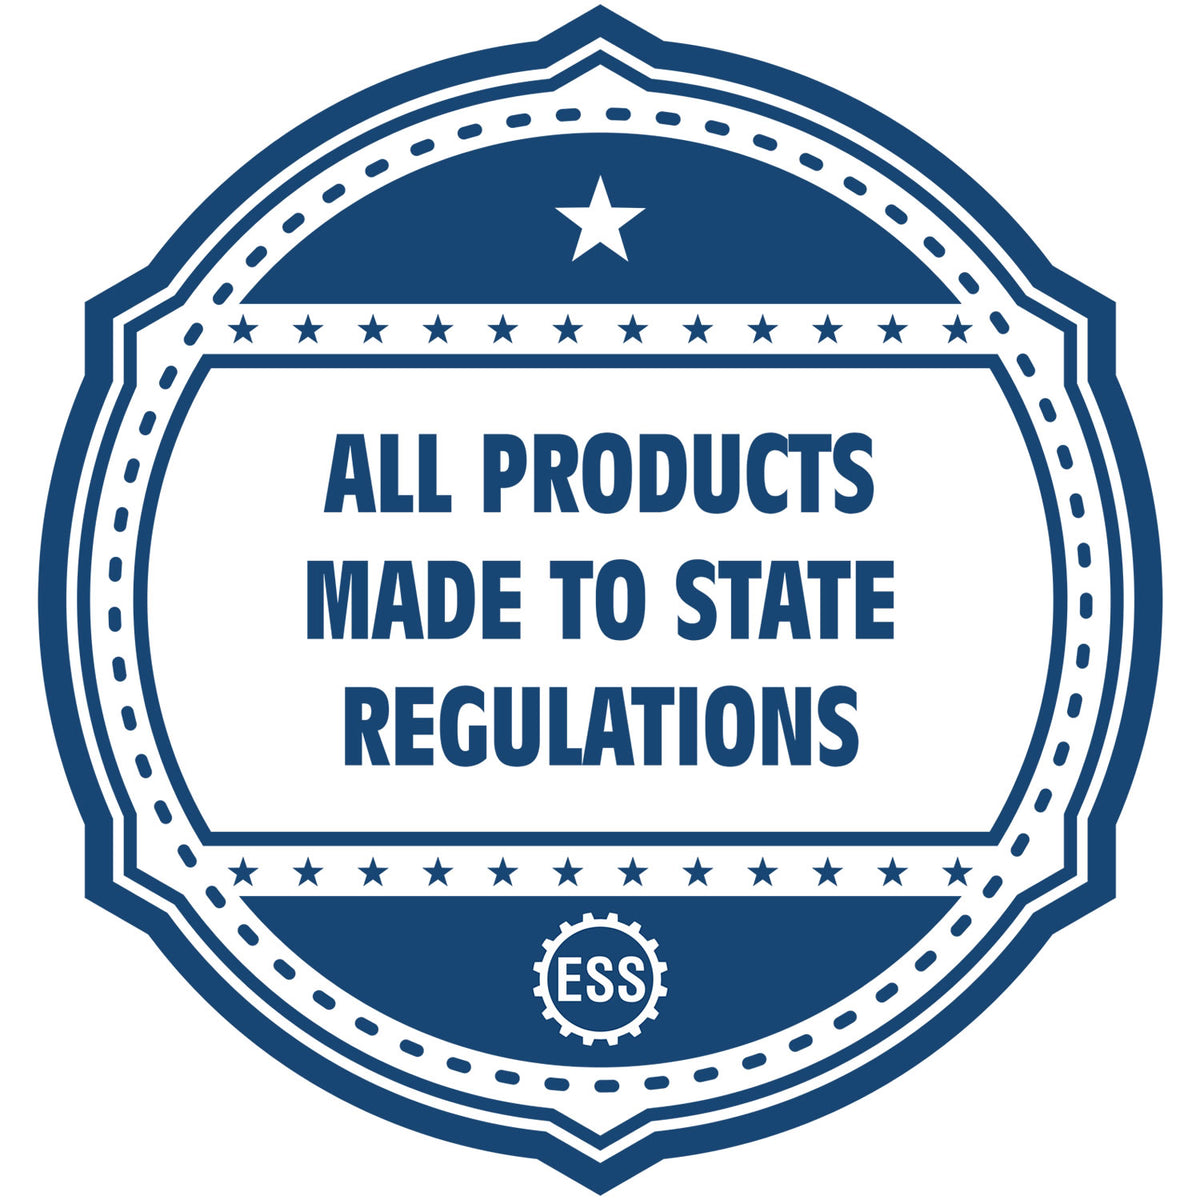 A blue icon or badge for the Self-Inking Ohio Geologist Stamp showing that this product is made in compliance with state regulations.